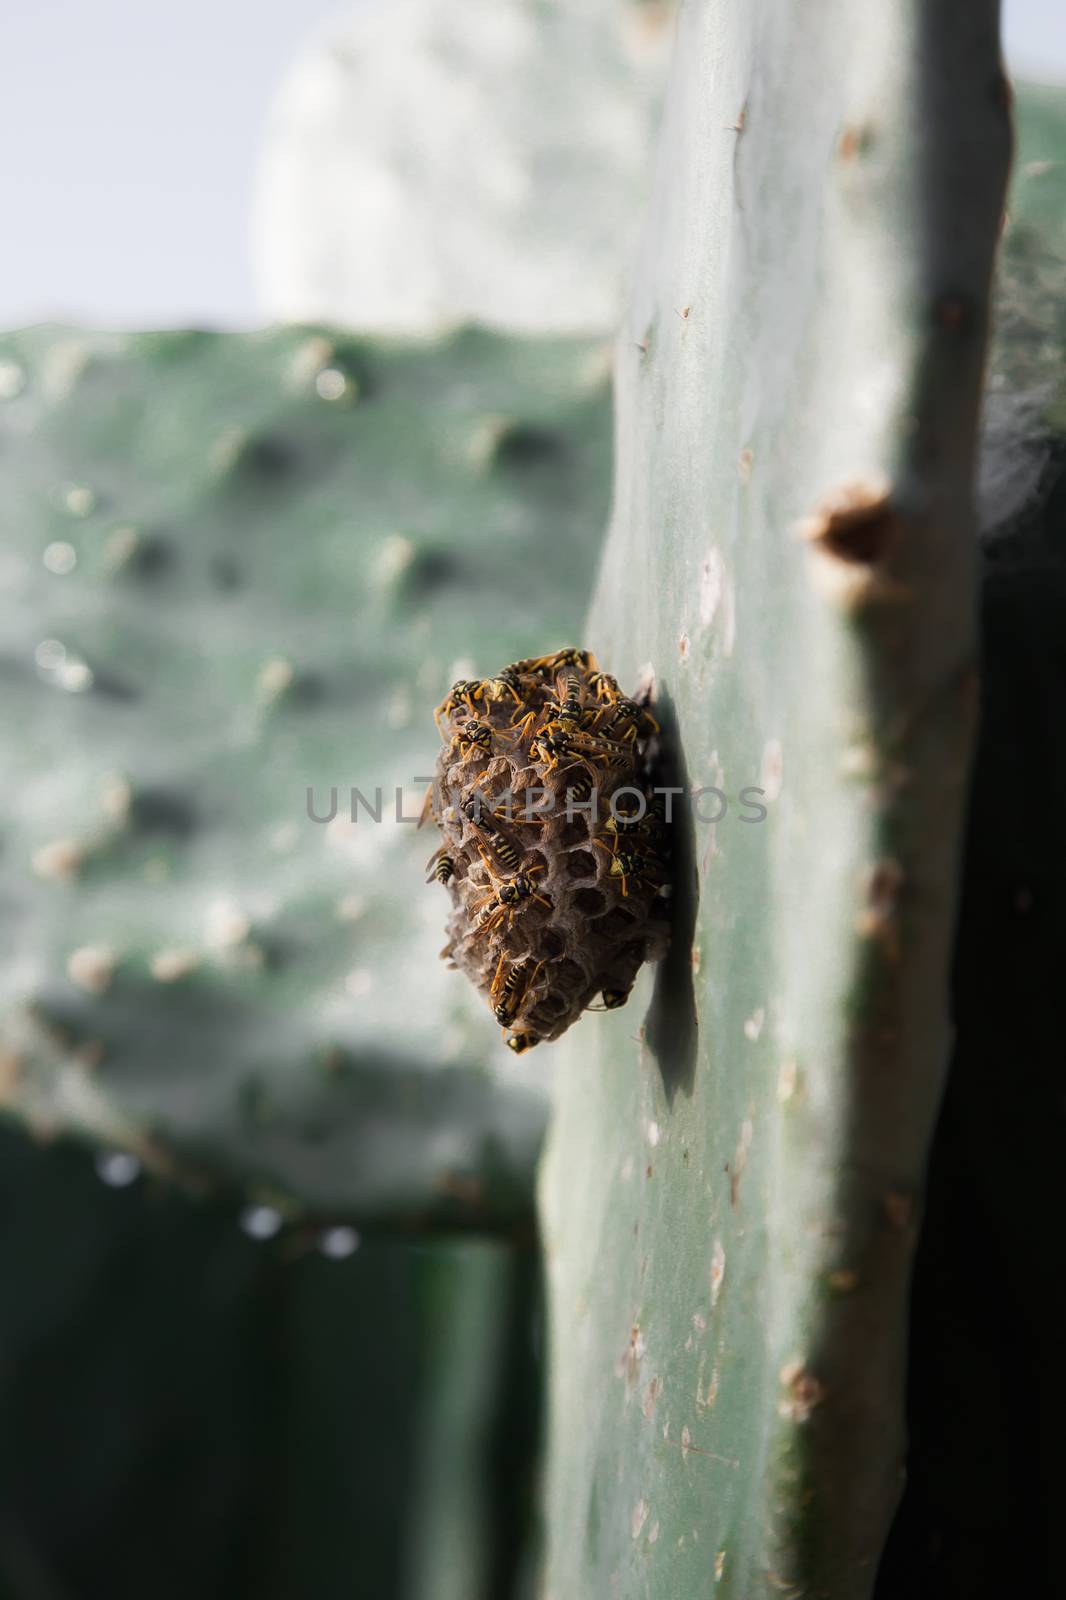 Wasp nest on a cactus leaf